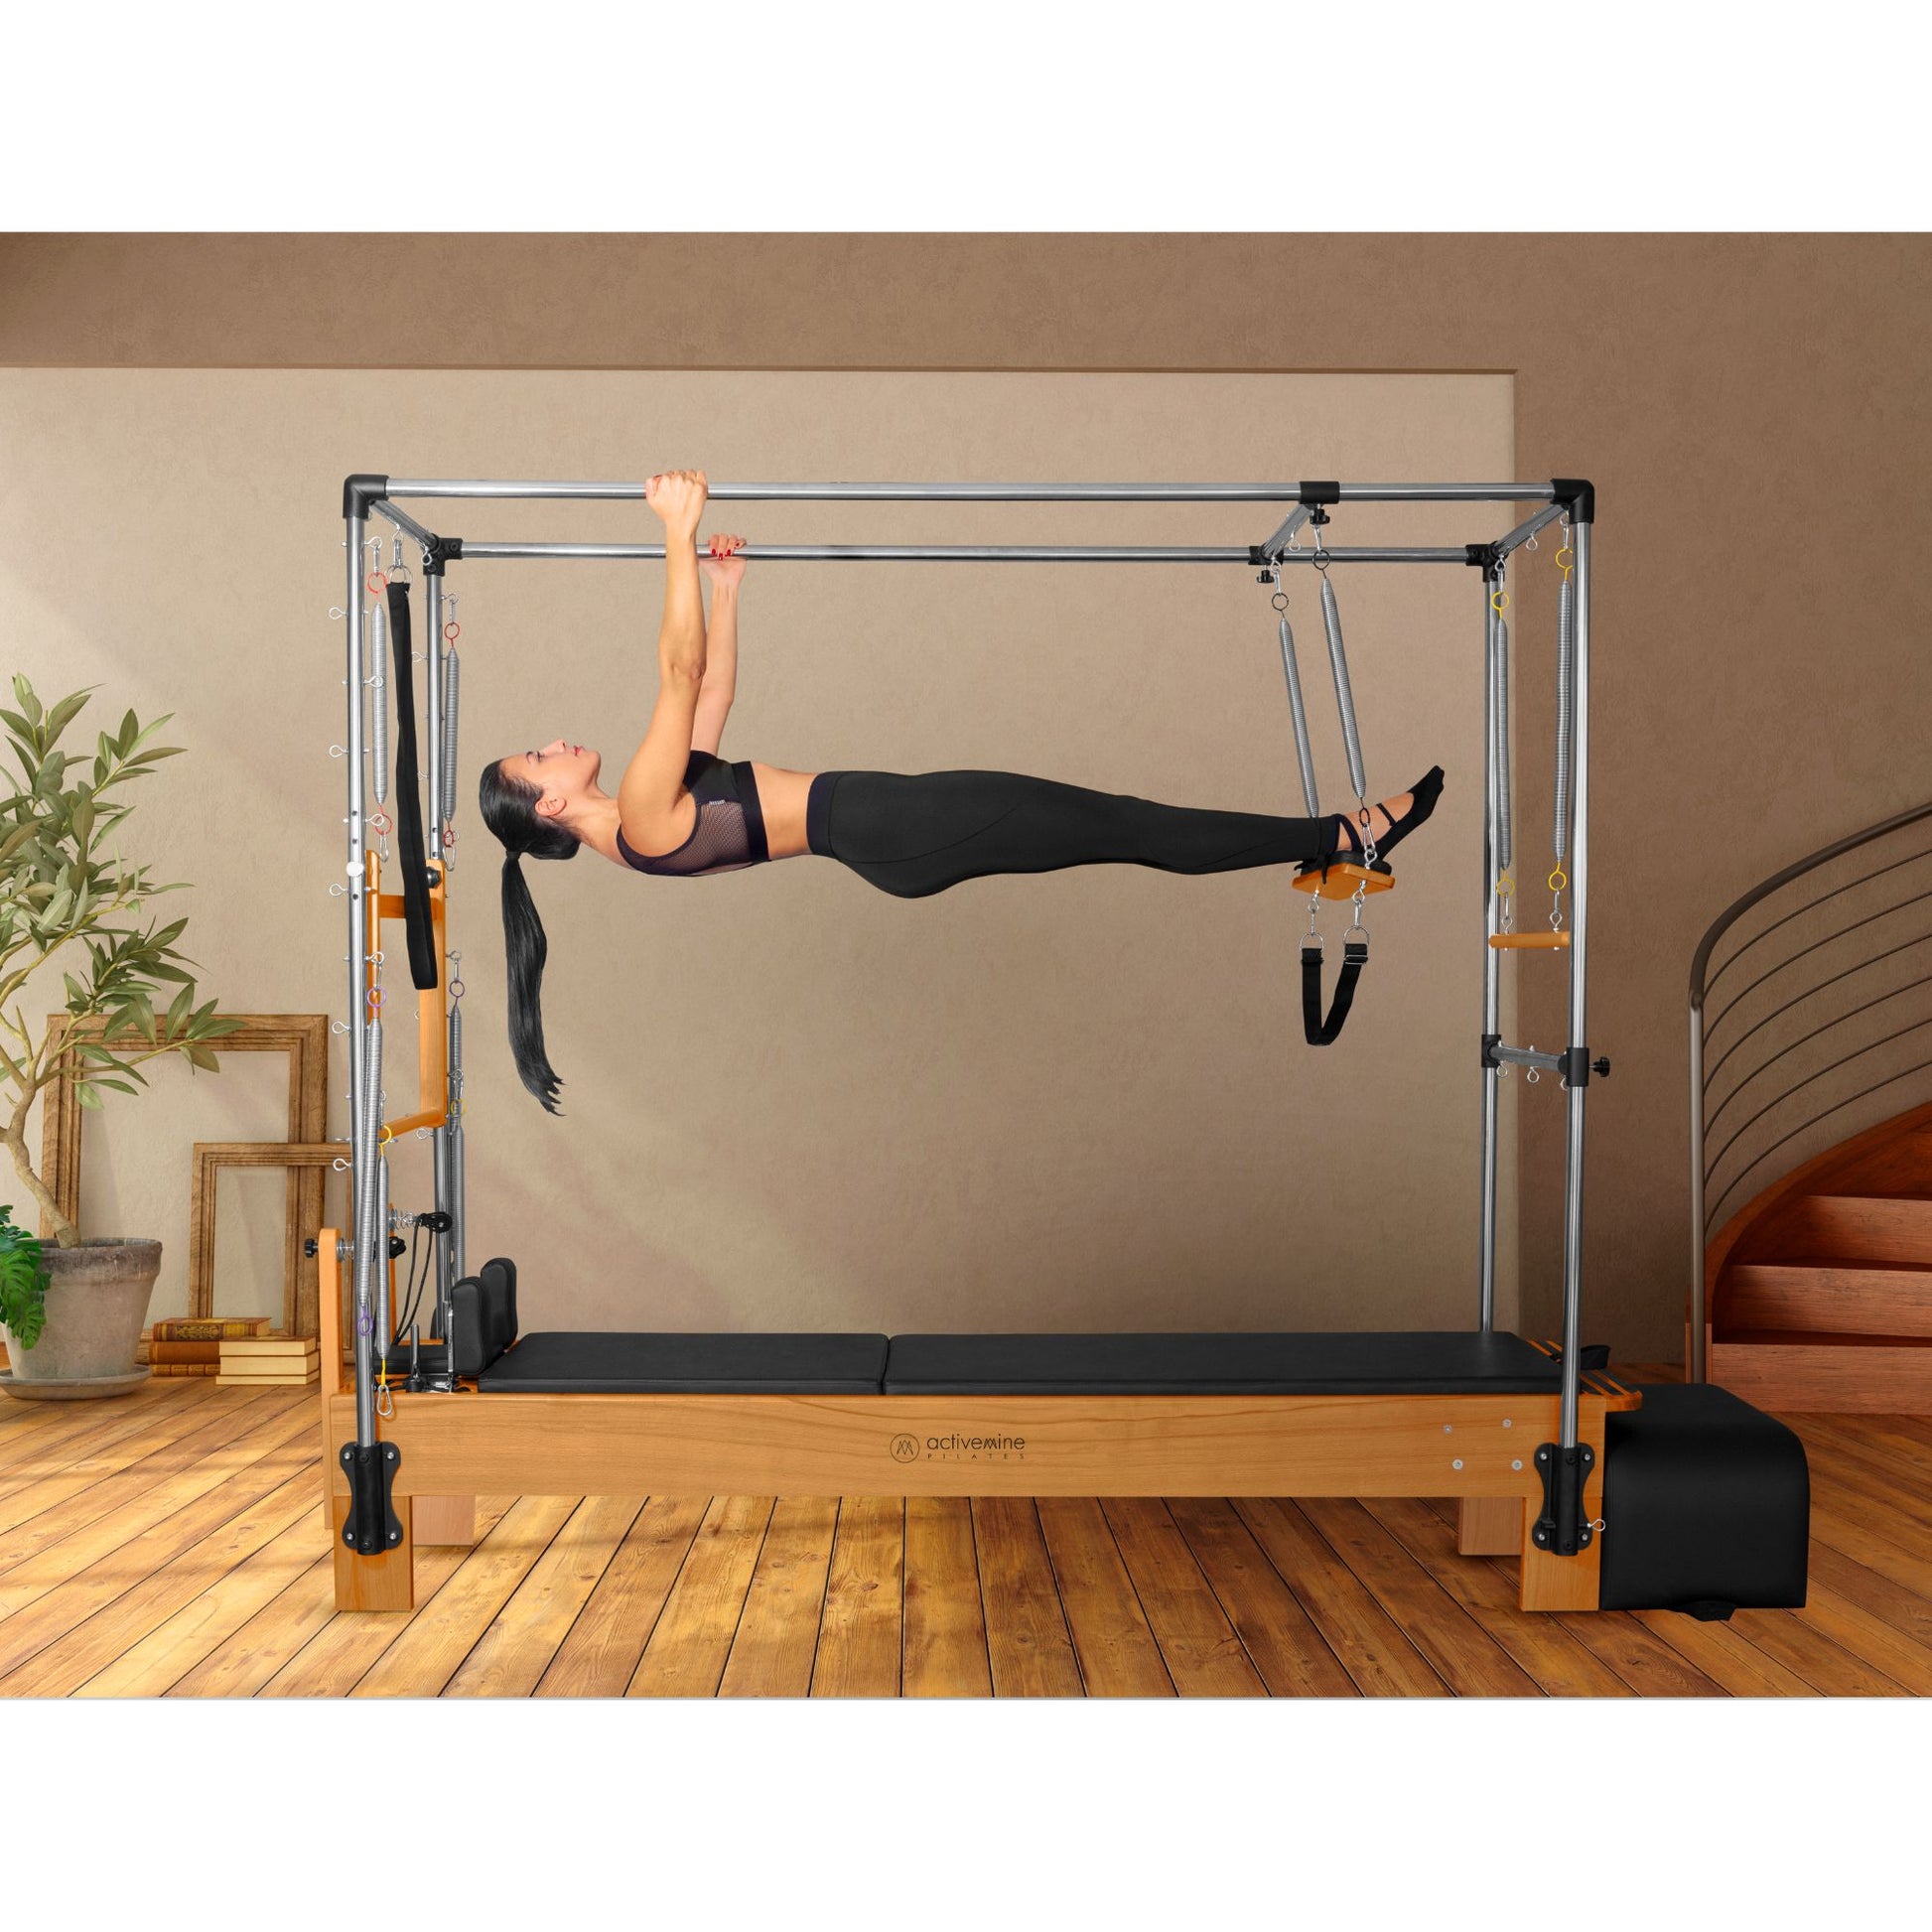 Professional pilates cadillac reformer_3 For Workouts 